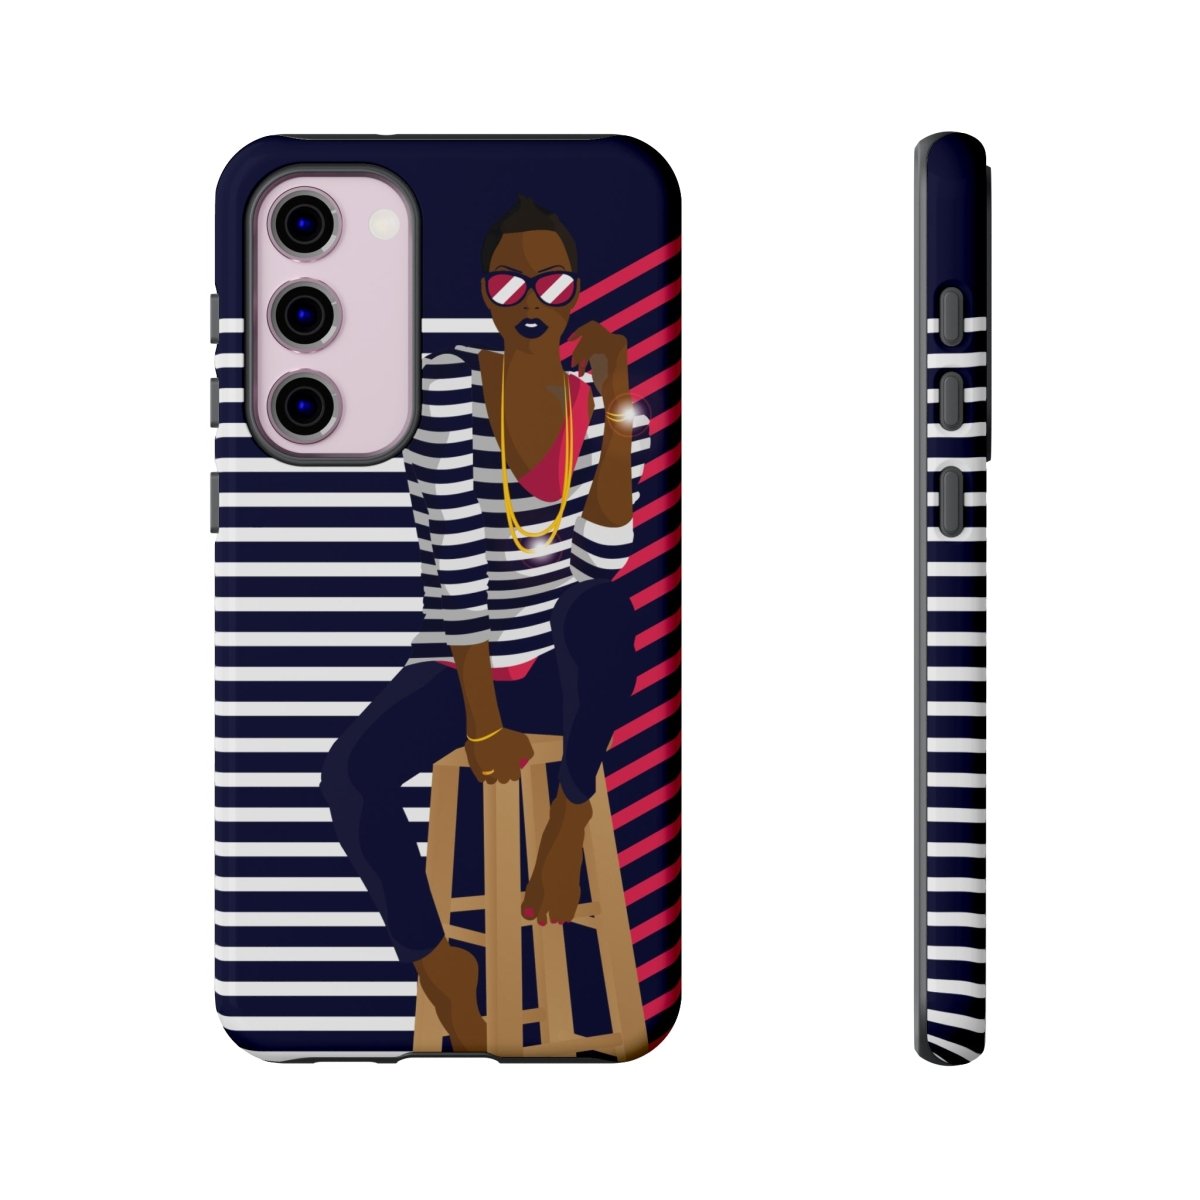 Lined Woman Phone Case - The Trini Gee